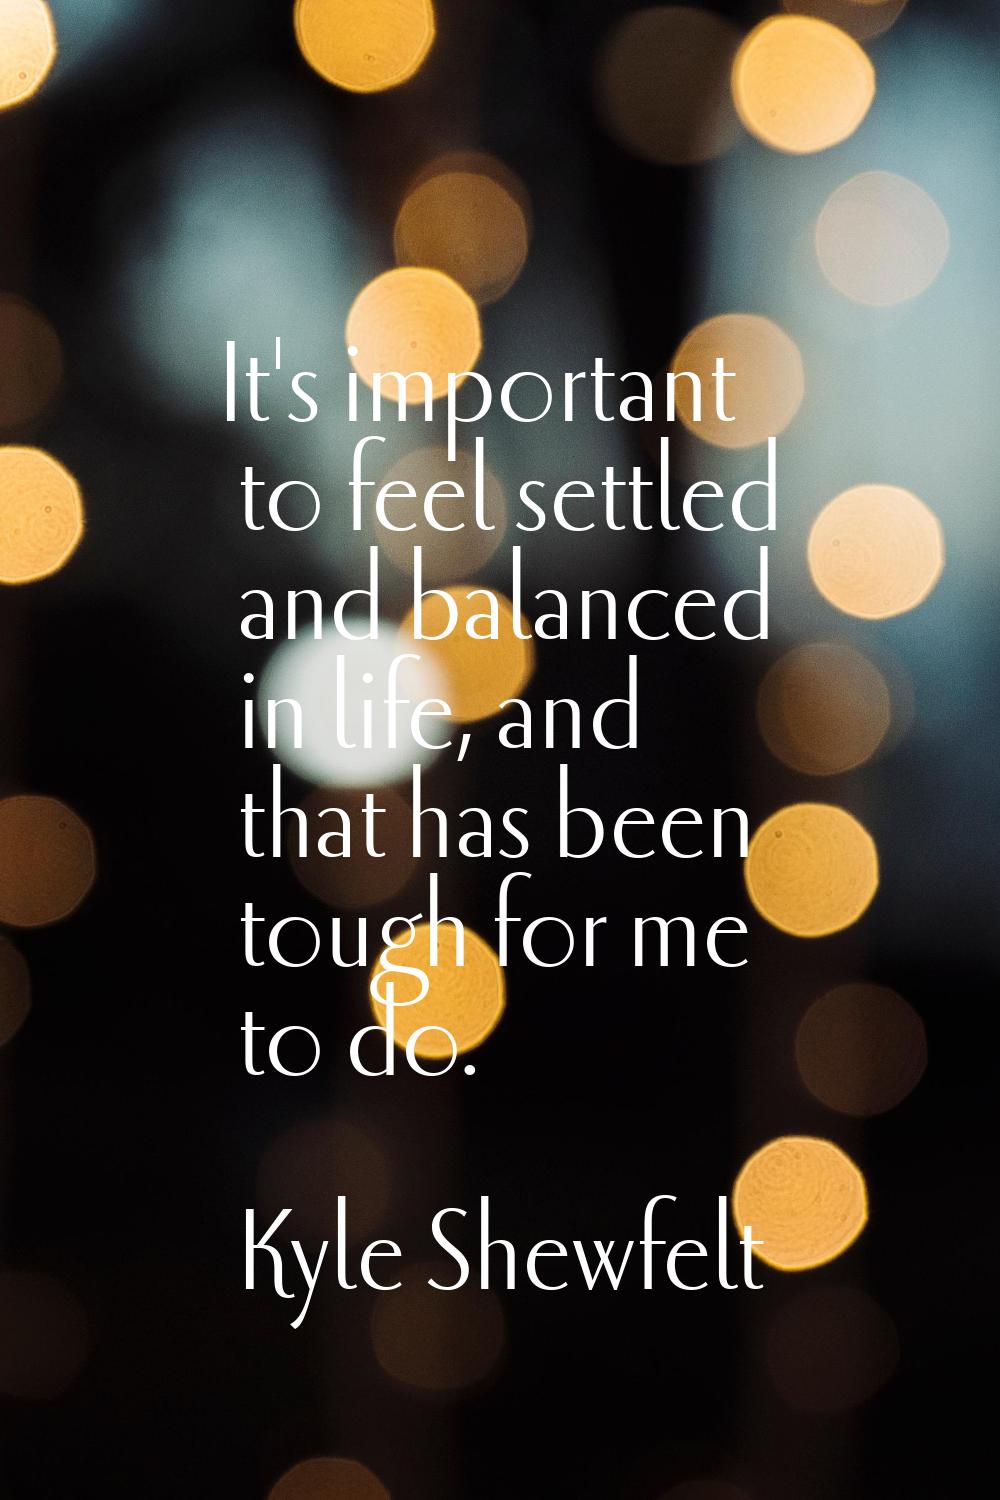 It's important to feel settled and balanced in life, and that has been tough for me to do.